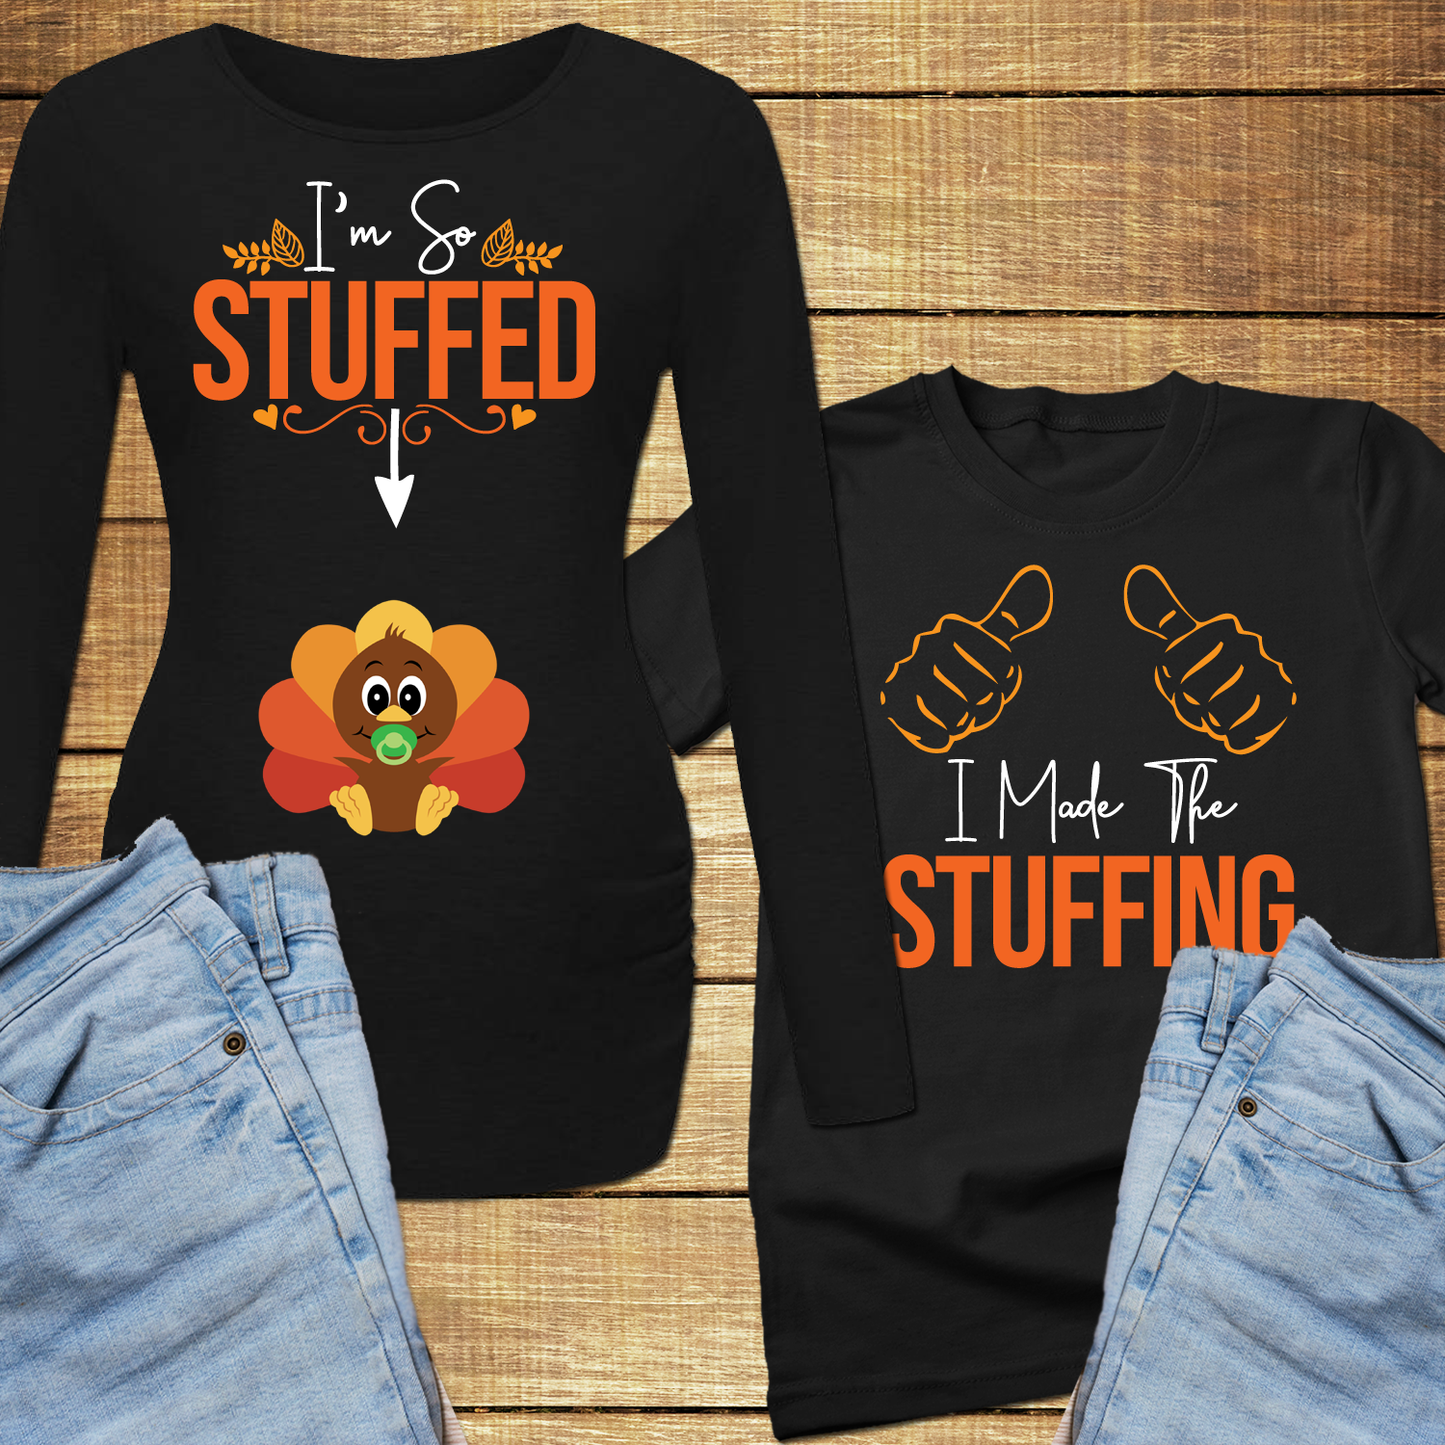 Couples Stuffed With A Little Turkey Maternity Shirt, Maternity Couples  Shirt, Thanksgiving Pregnancy Announcement, Thanksgiving Maternity 